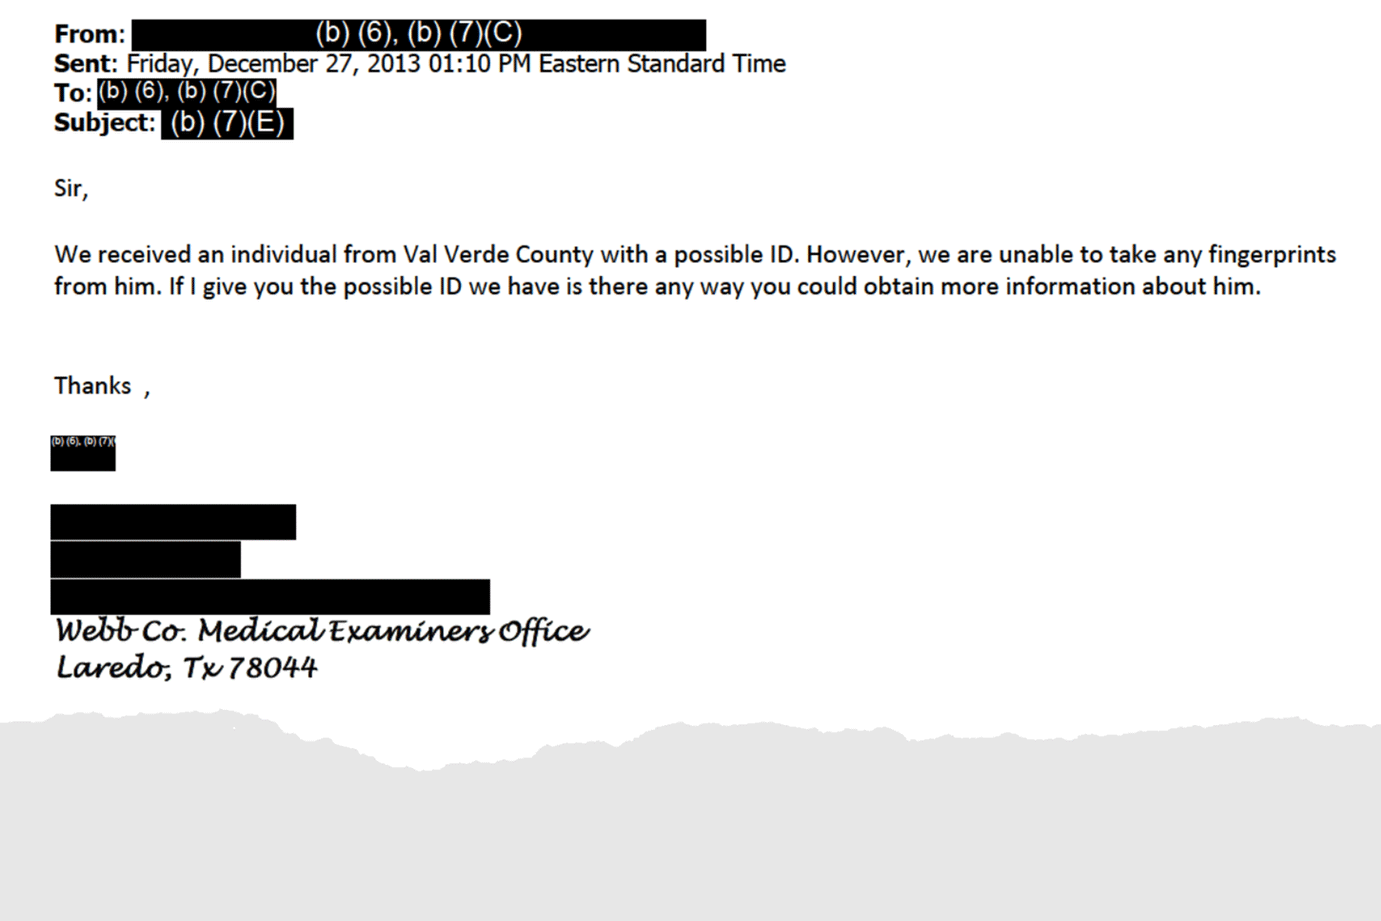 E-mail exchanges between investigators in Texas. FOIA request made by Yael Grauer.